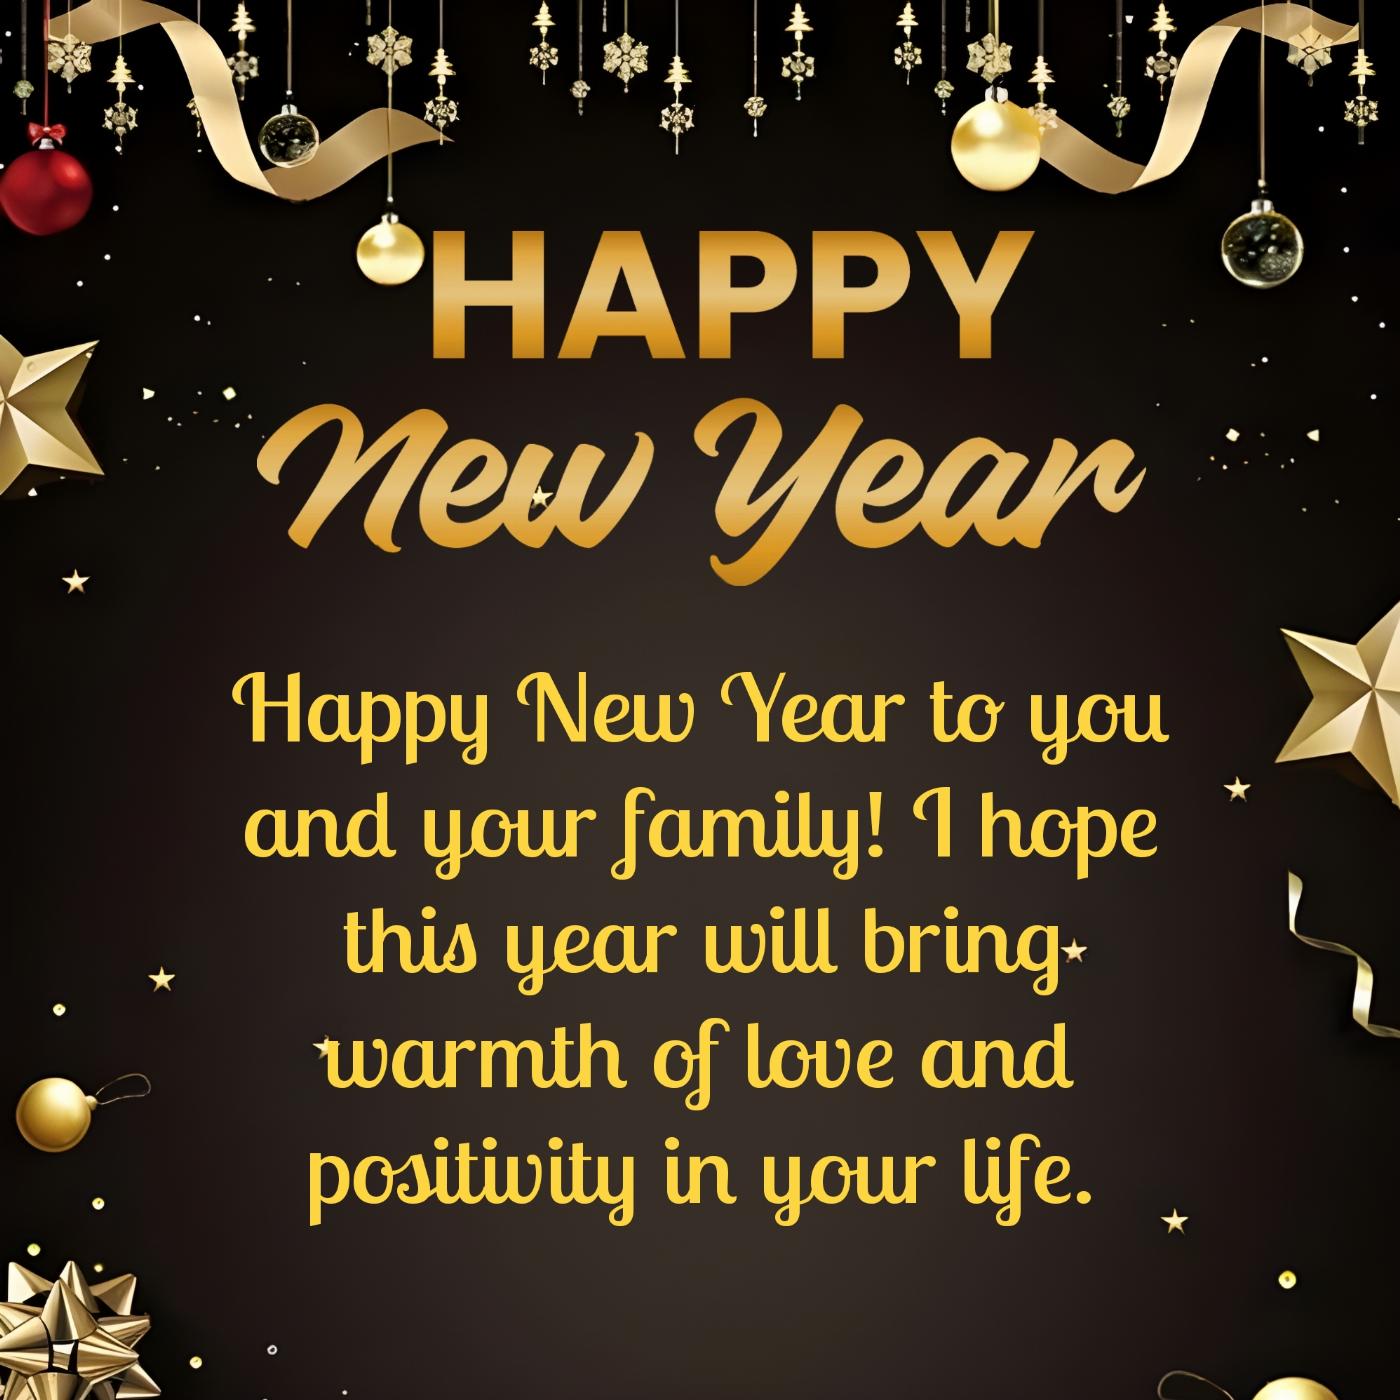 Happy New Year to you and your family